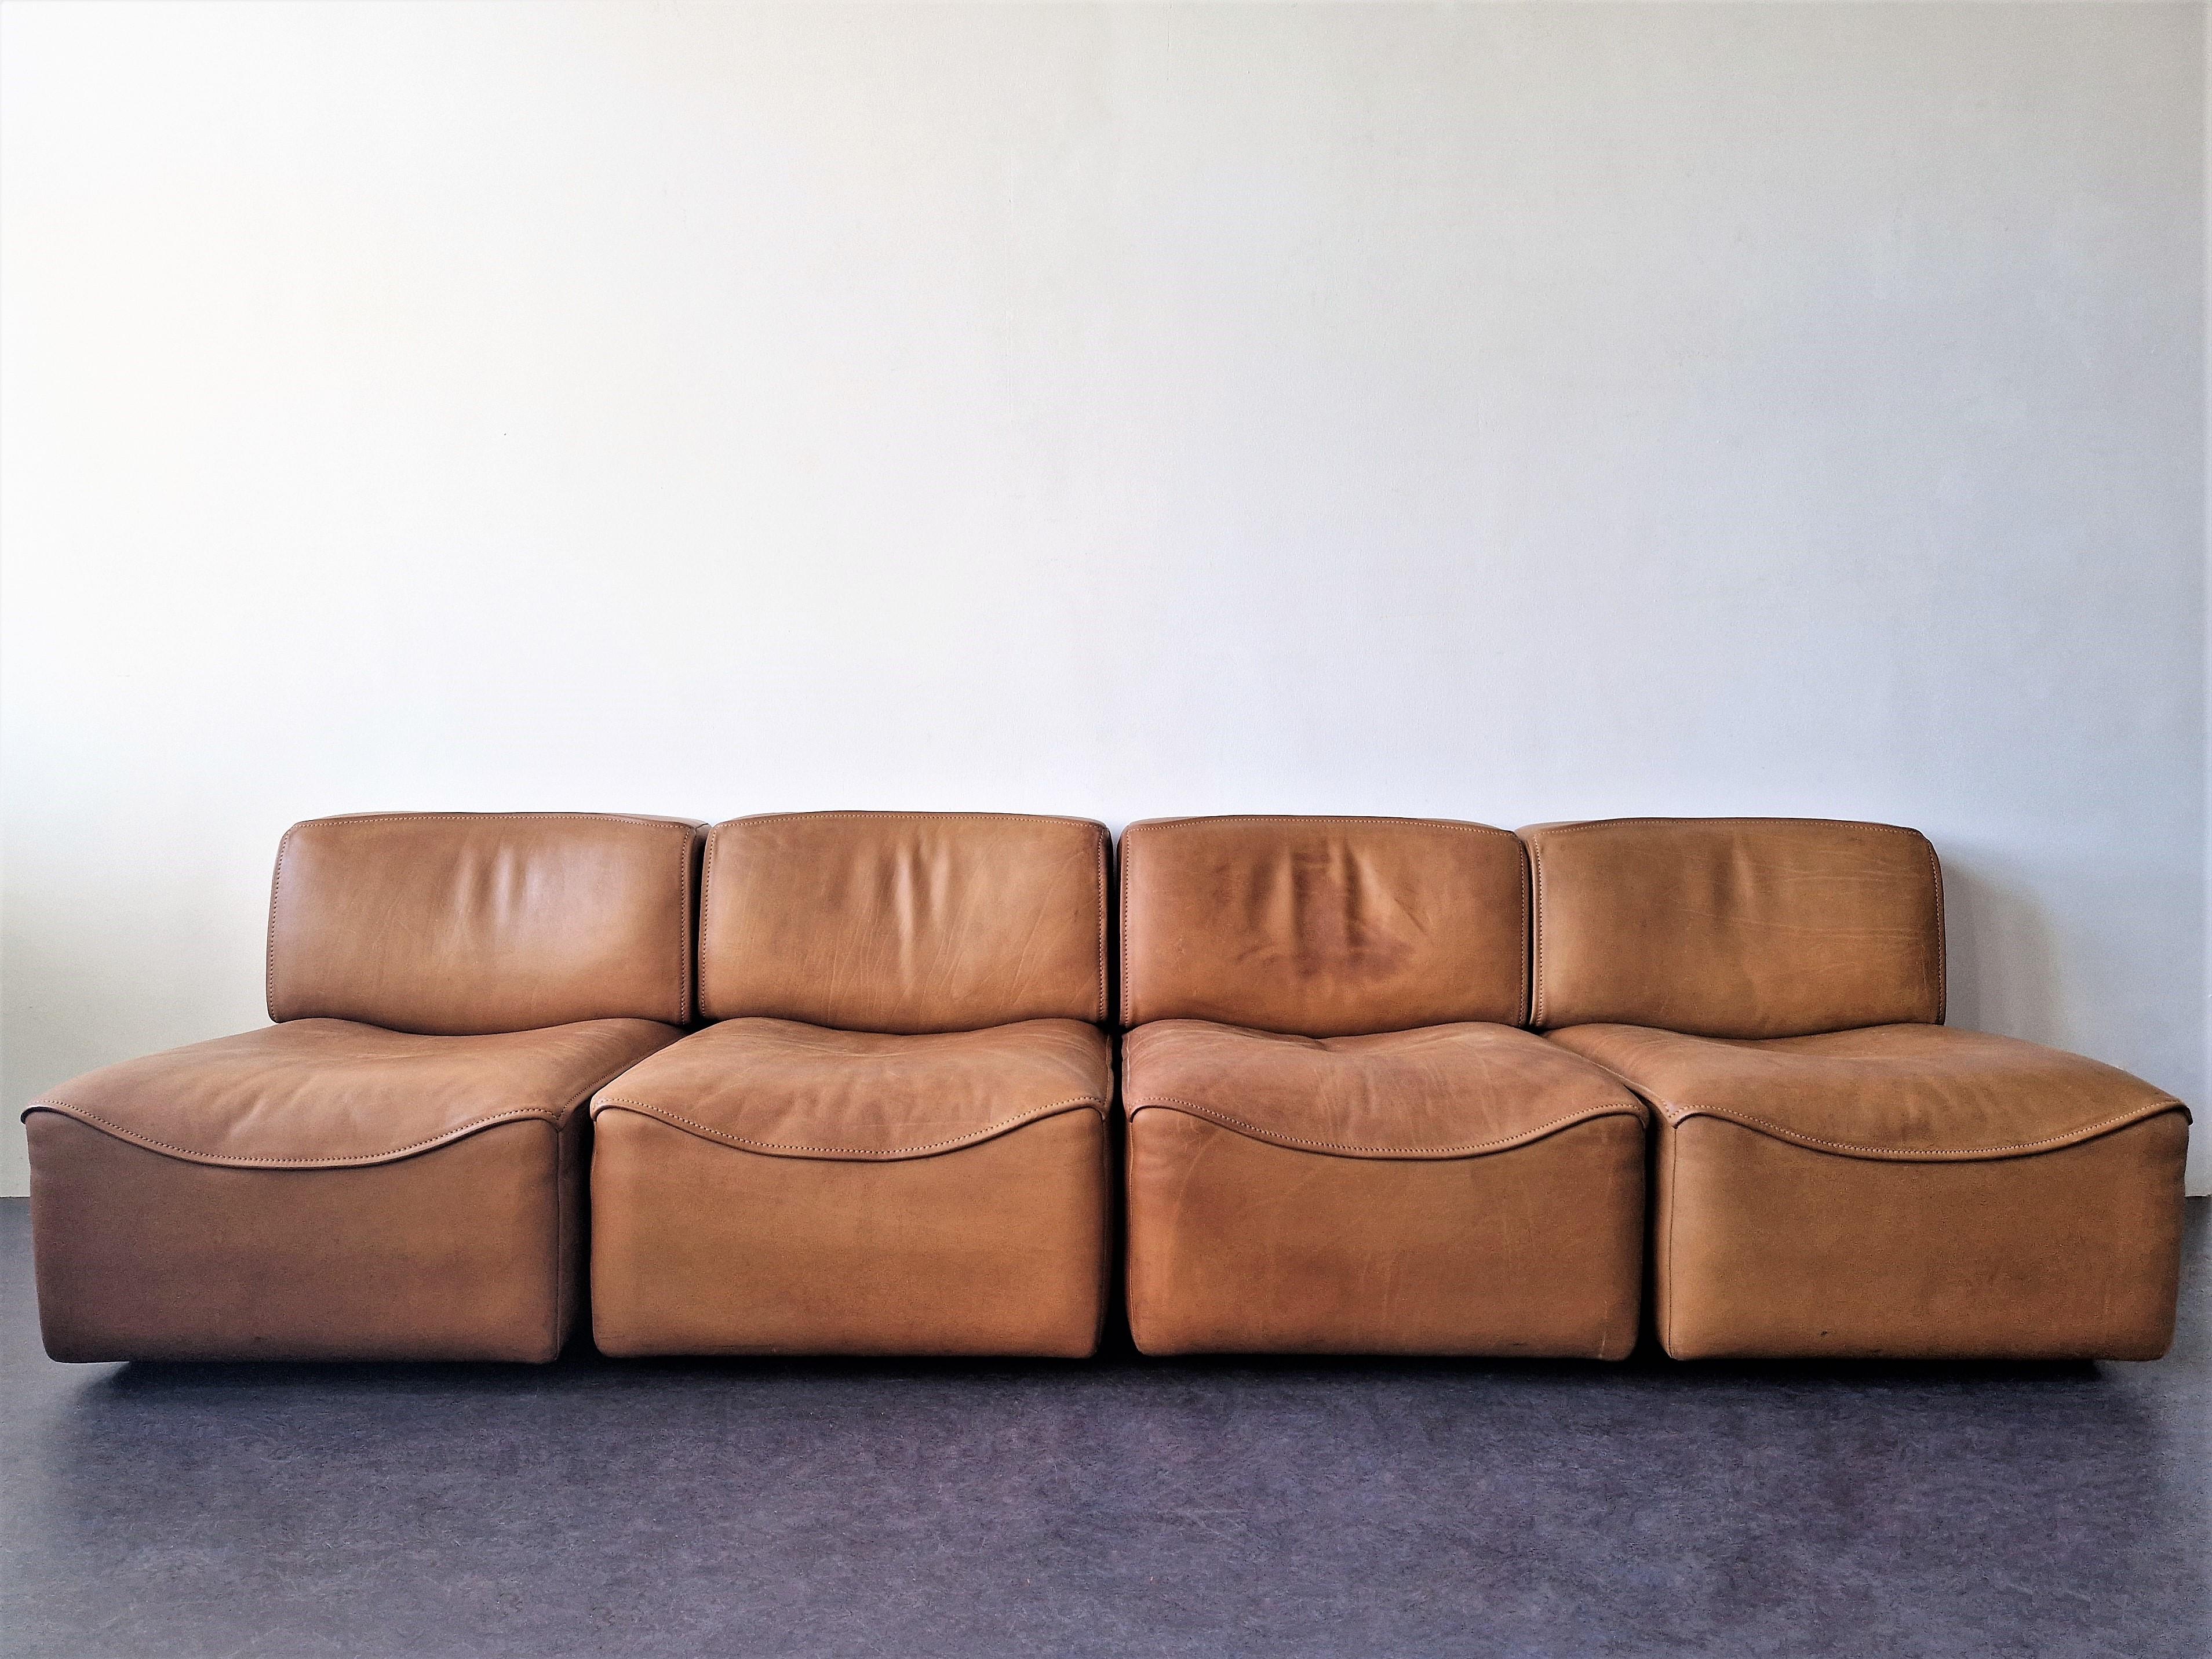 This model DS-15 modular leather sofa was made by De Sede in Switzerland in the 1970s. It consists out of 4 elements that can be placed in any varied position. The elements are made of thick and high quality, smooth buffalo leather that makes it